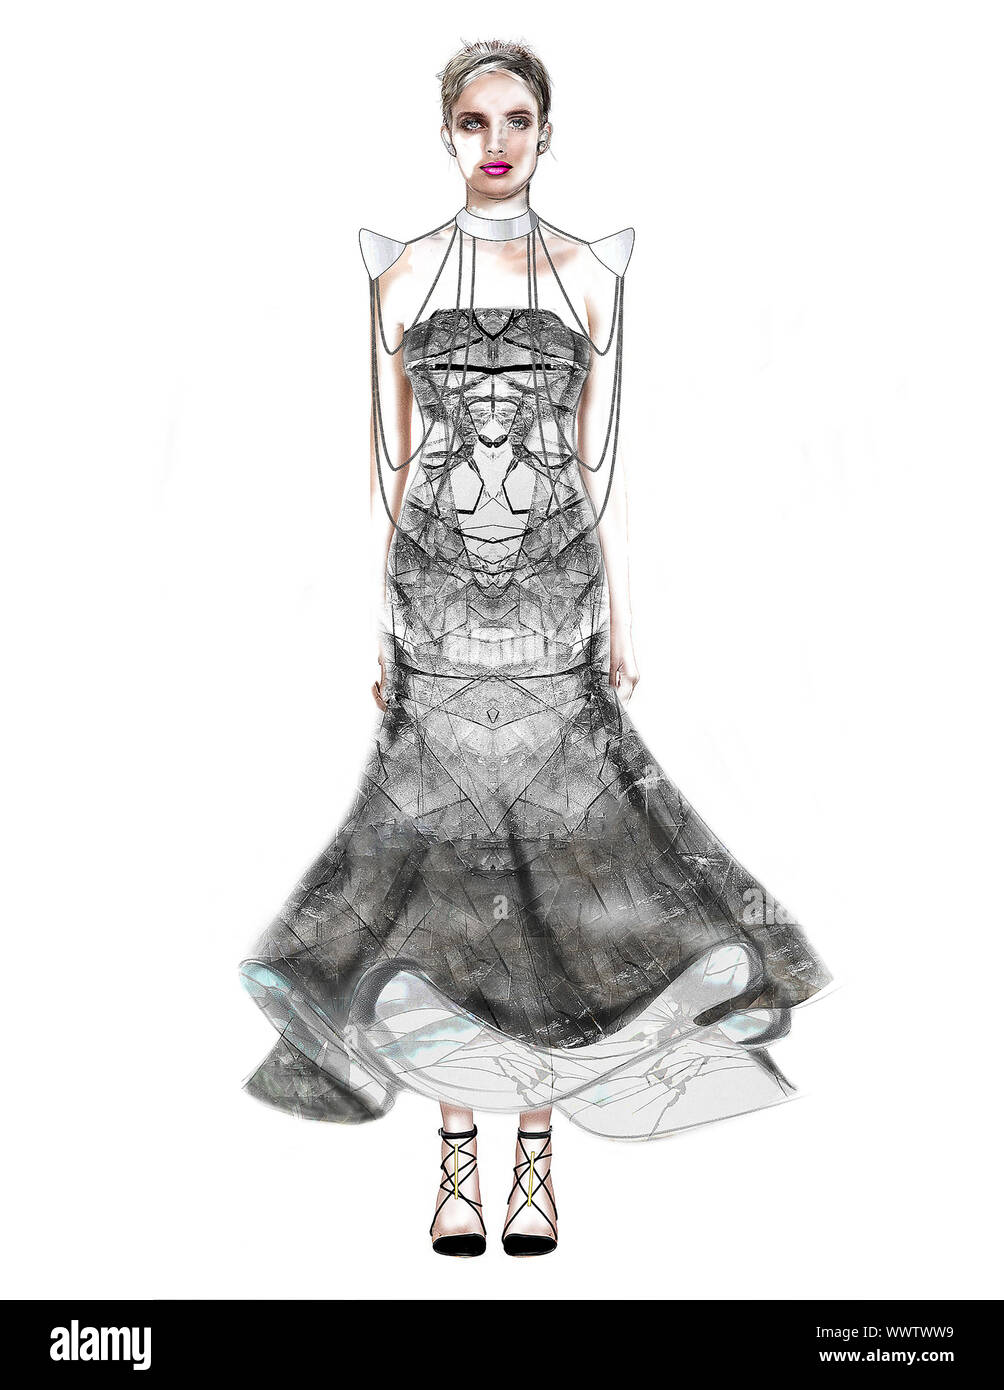 Discover 146+ outfit sketches super hot